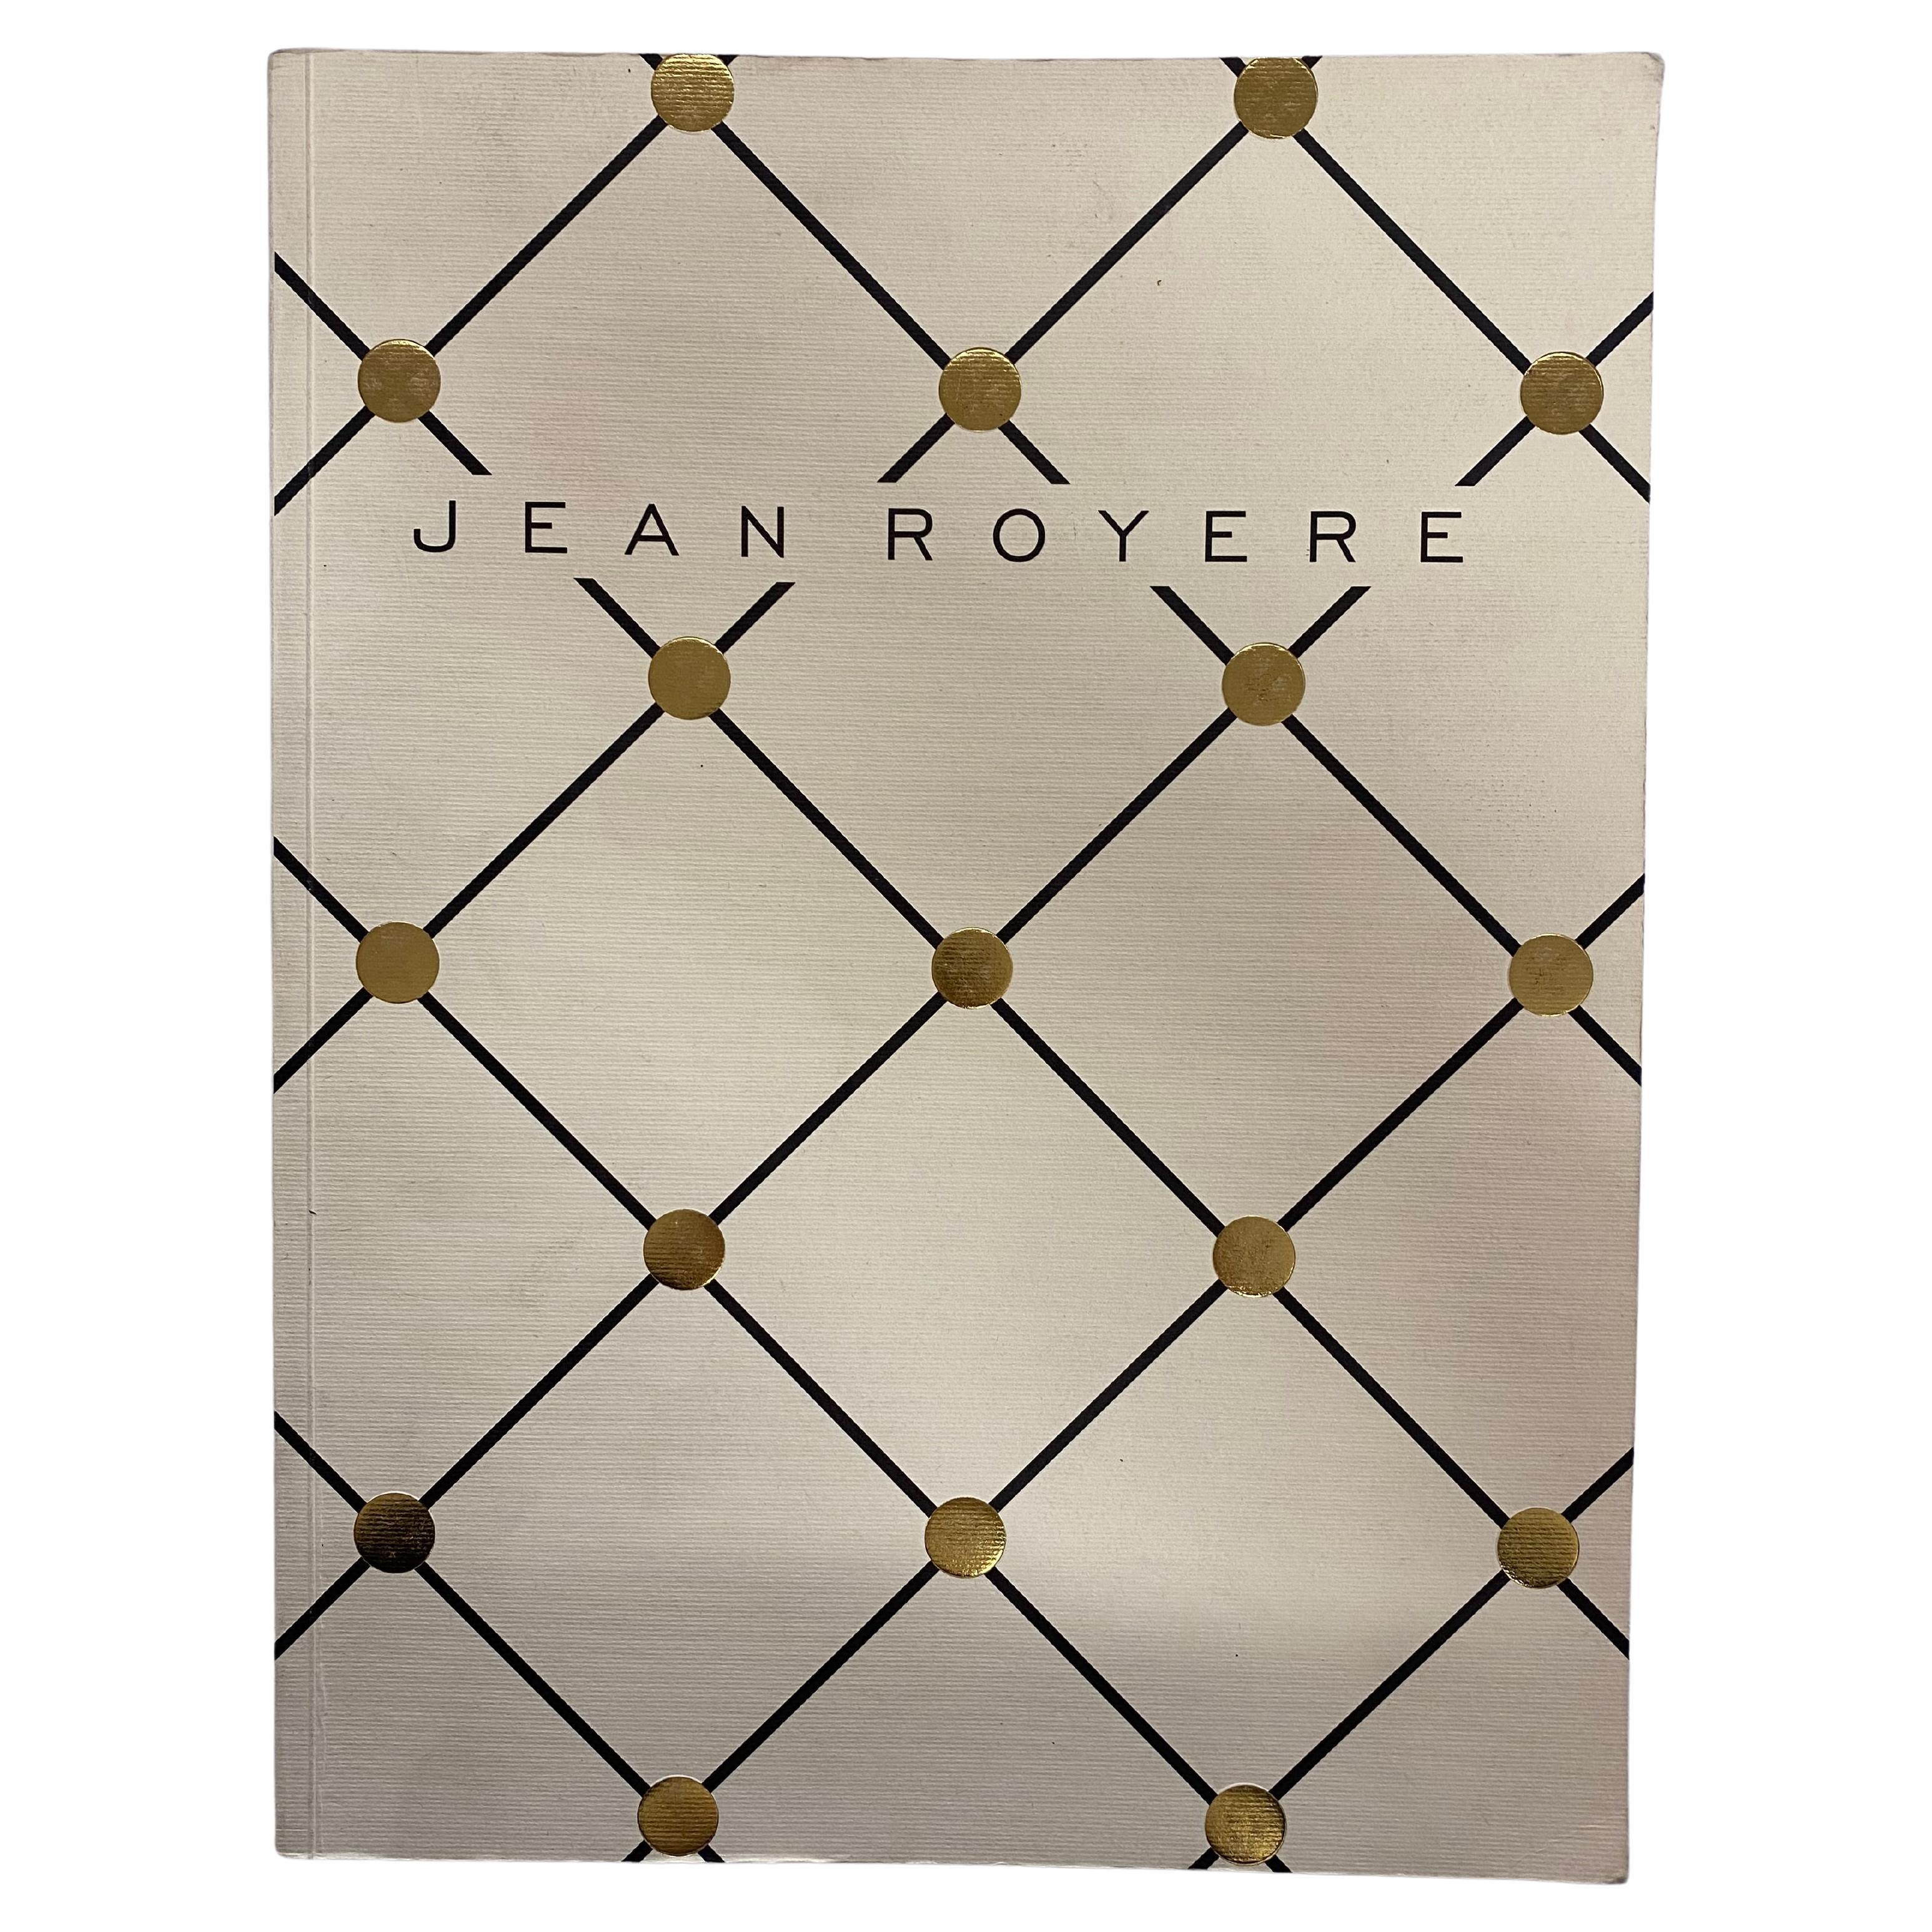 Jean Royere by Catherine & Stephane De Beyrie & Jacques Ouaiss  (Book)